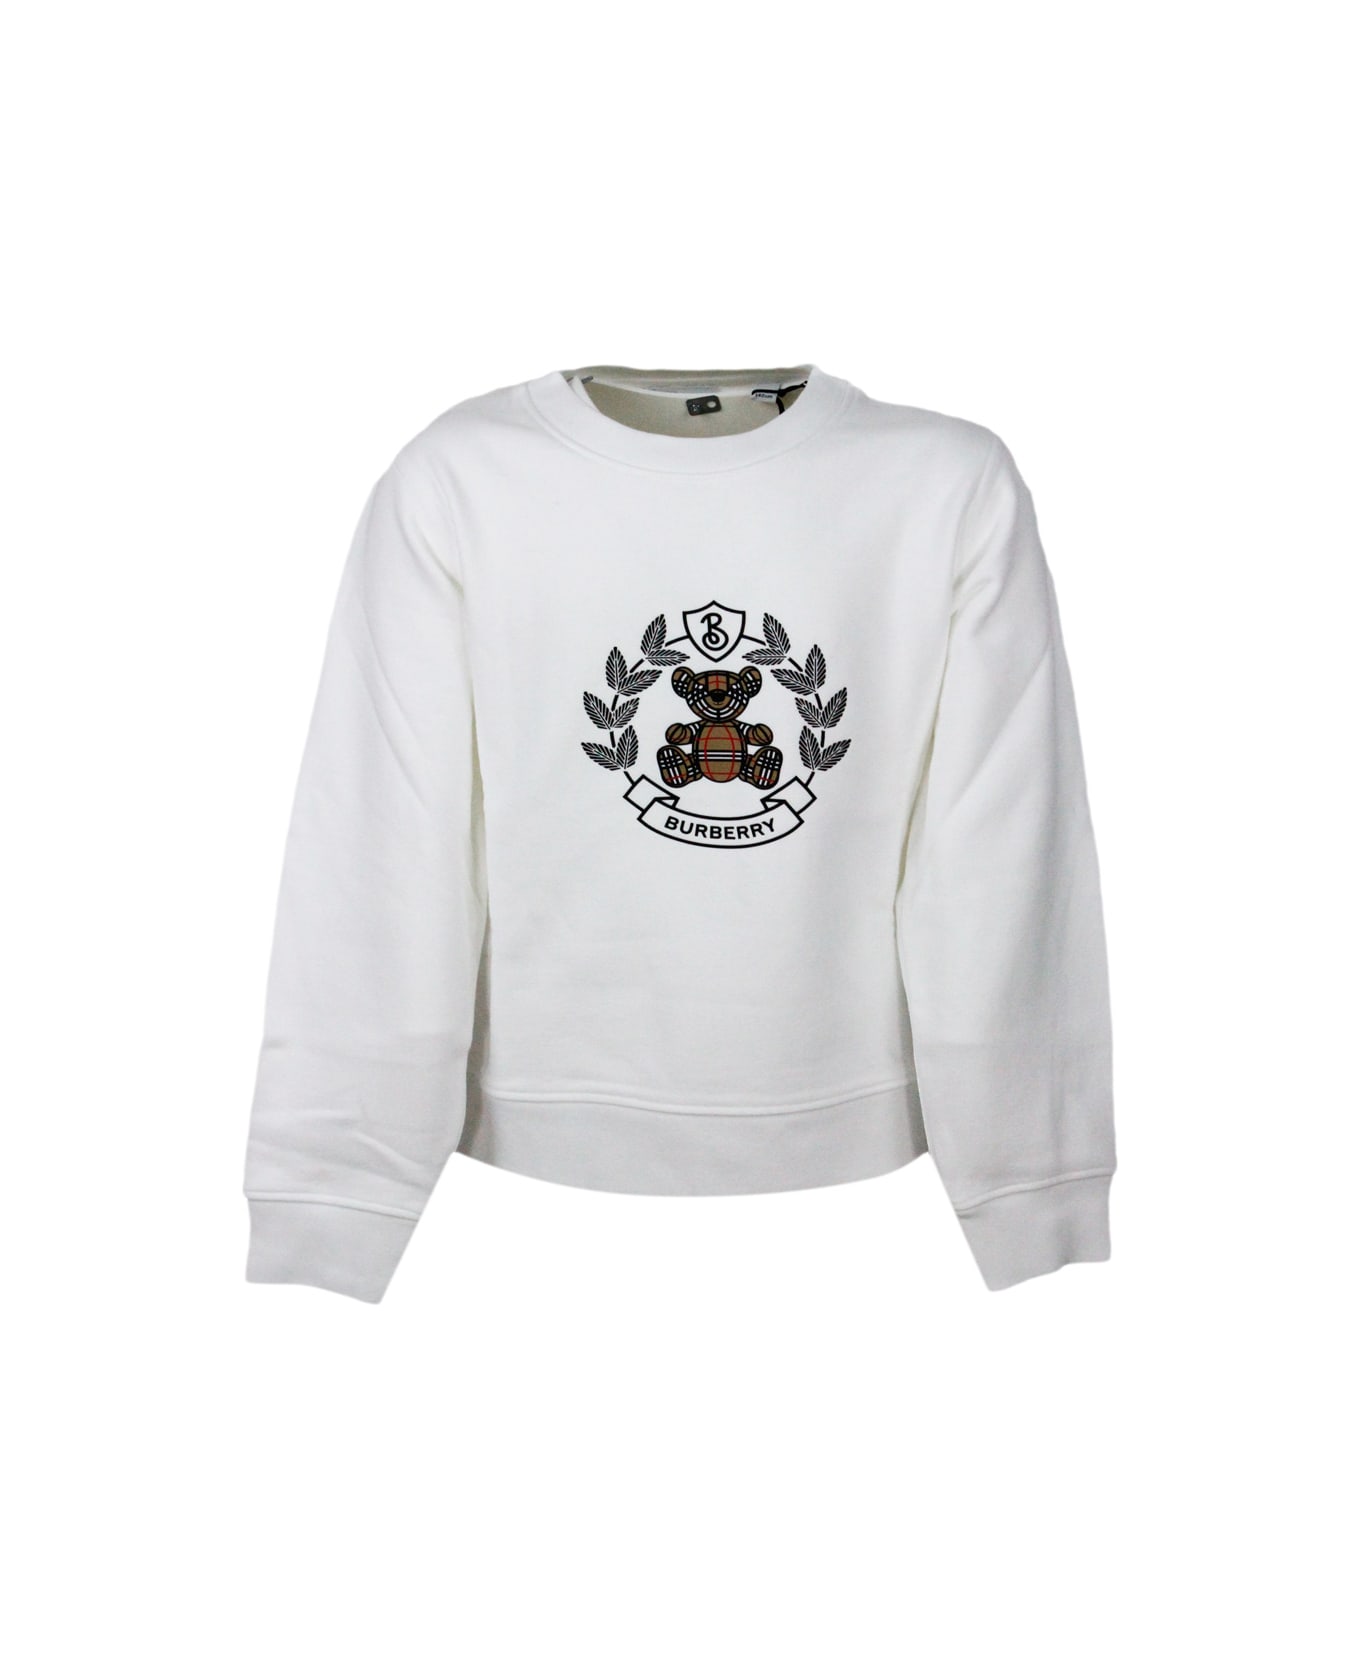 Burberry Crewneck Sweatshirt In Cotton Jersey With Classic Check Teddy Bear Print On The Front - White ニットウェア＆スウェットシャツ